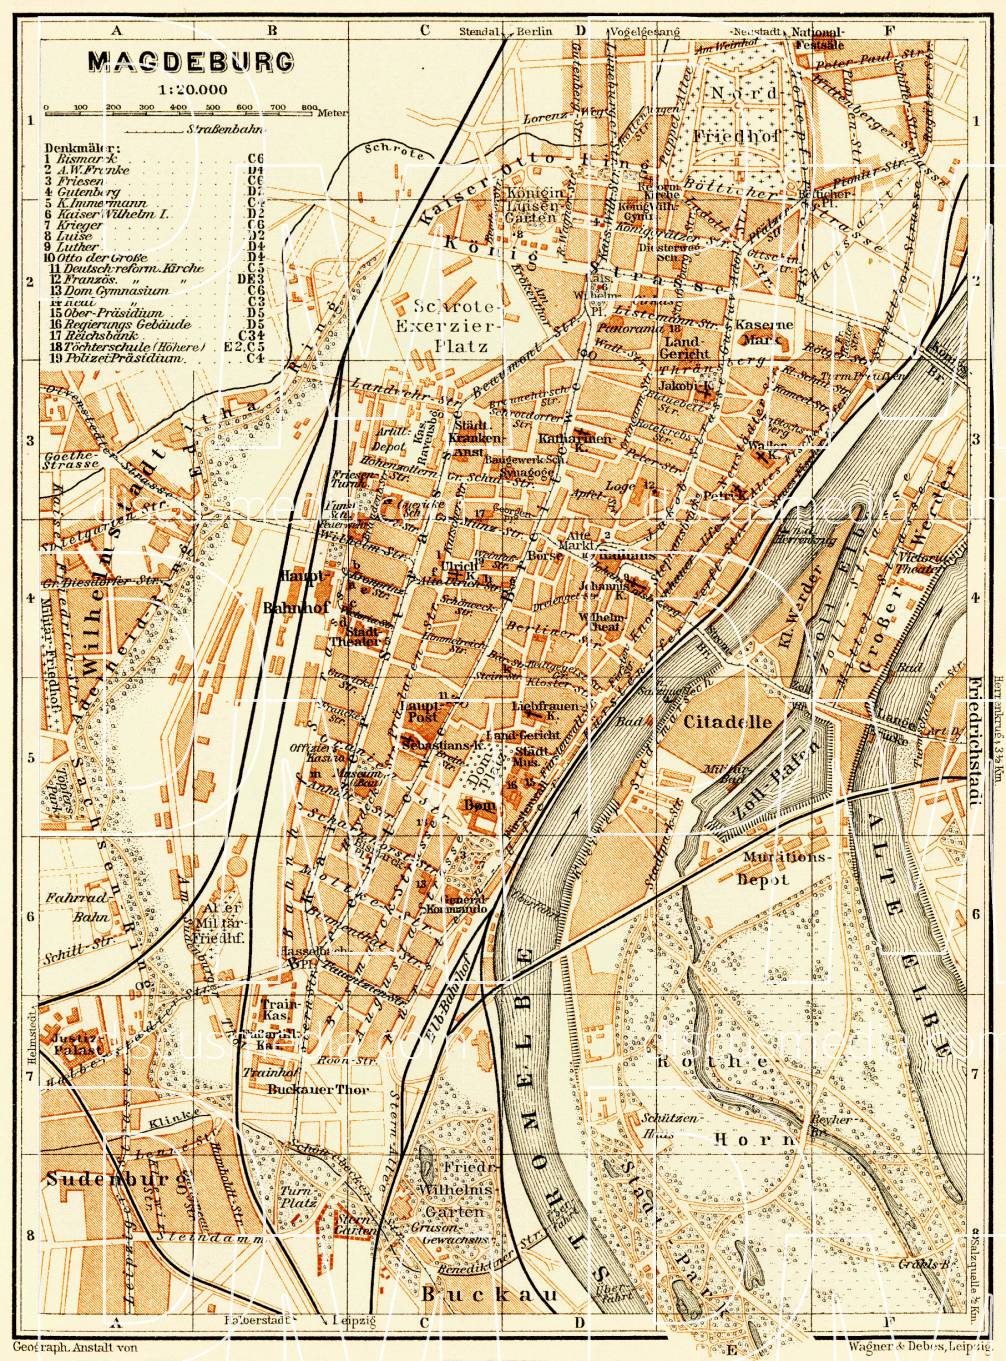 Old map of Magdeburg in 1906. Buy vintage map replica poster print or